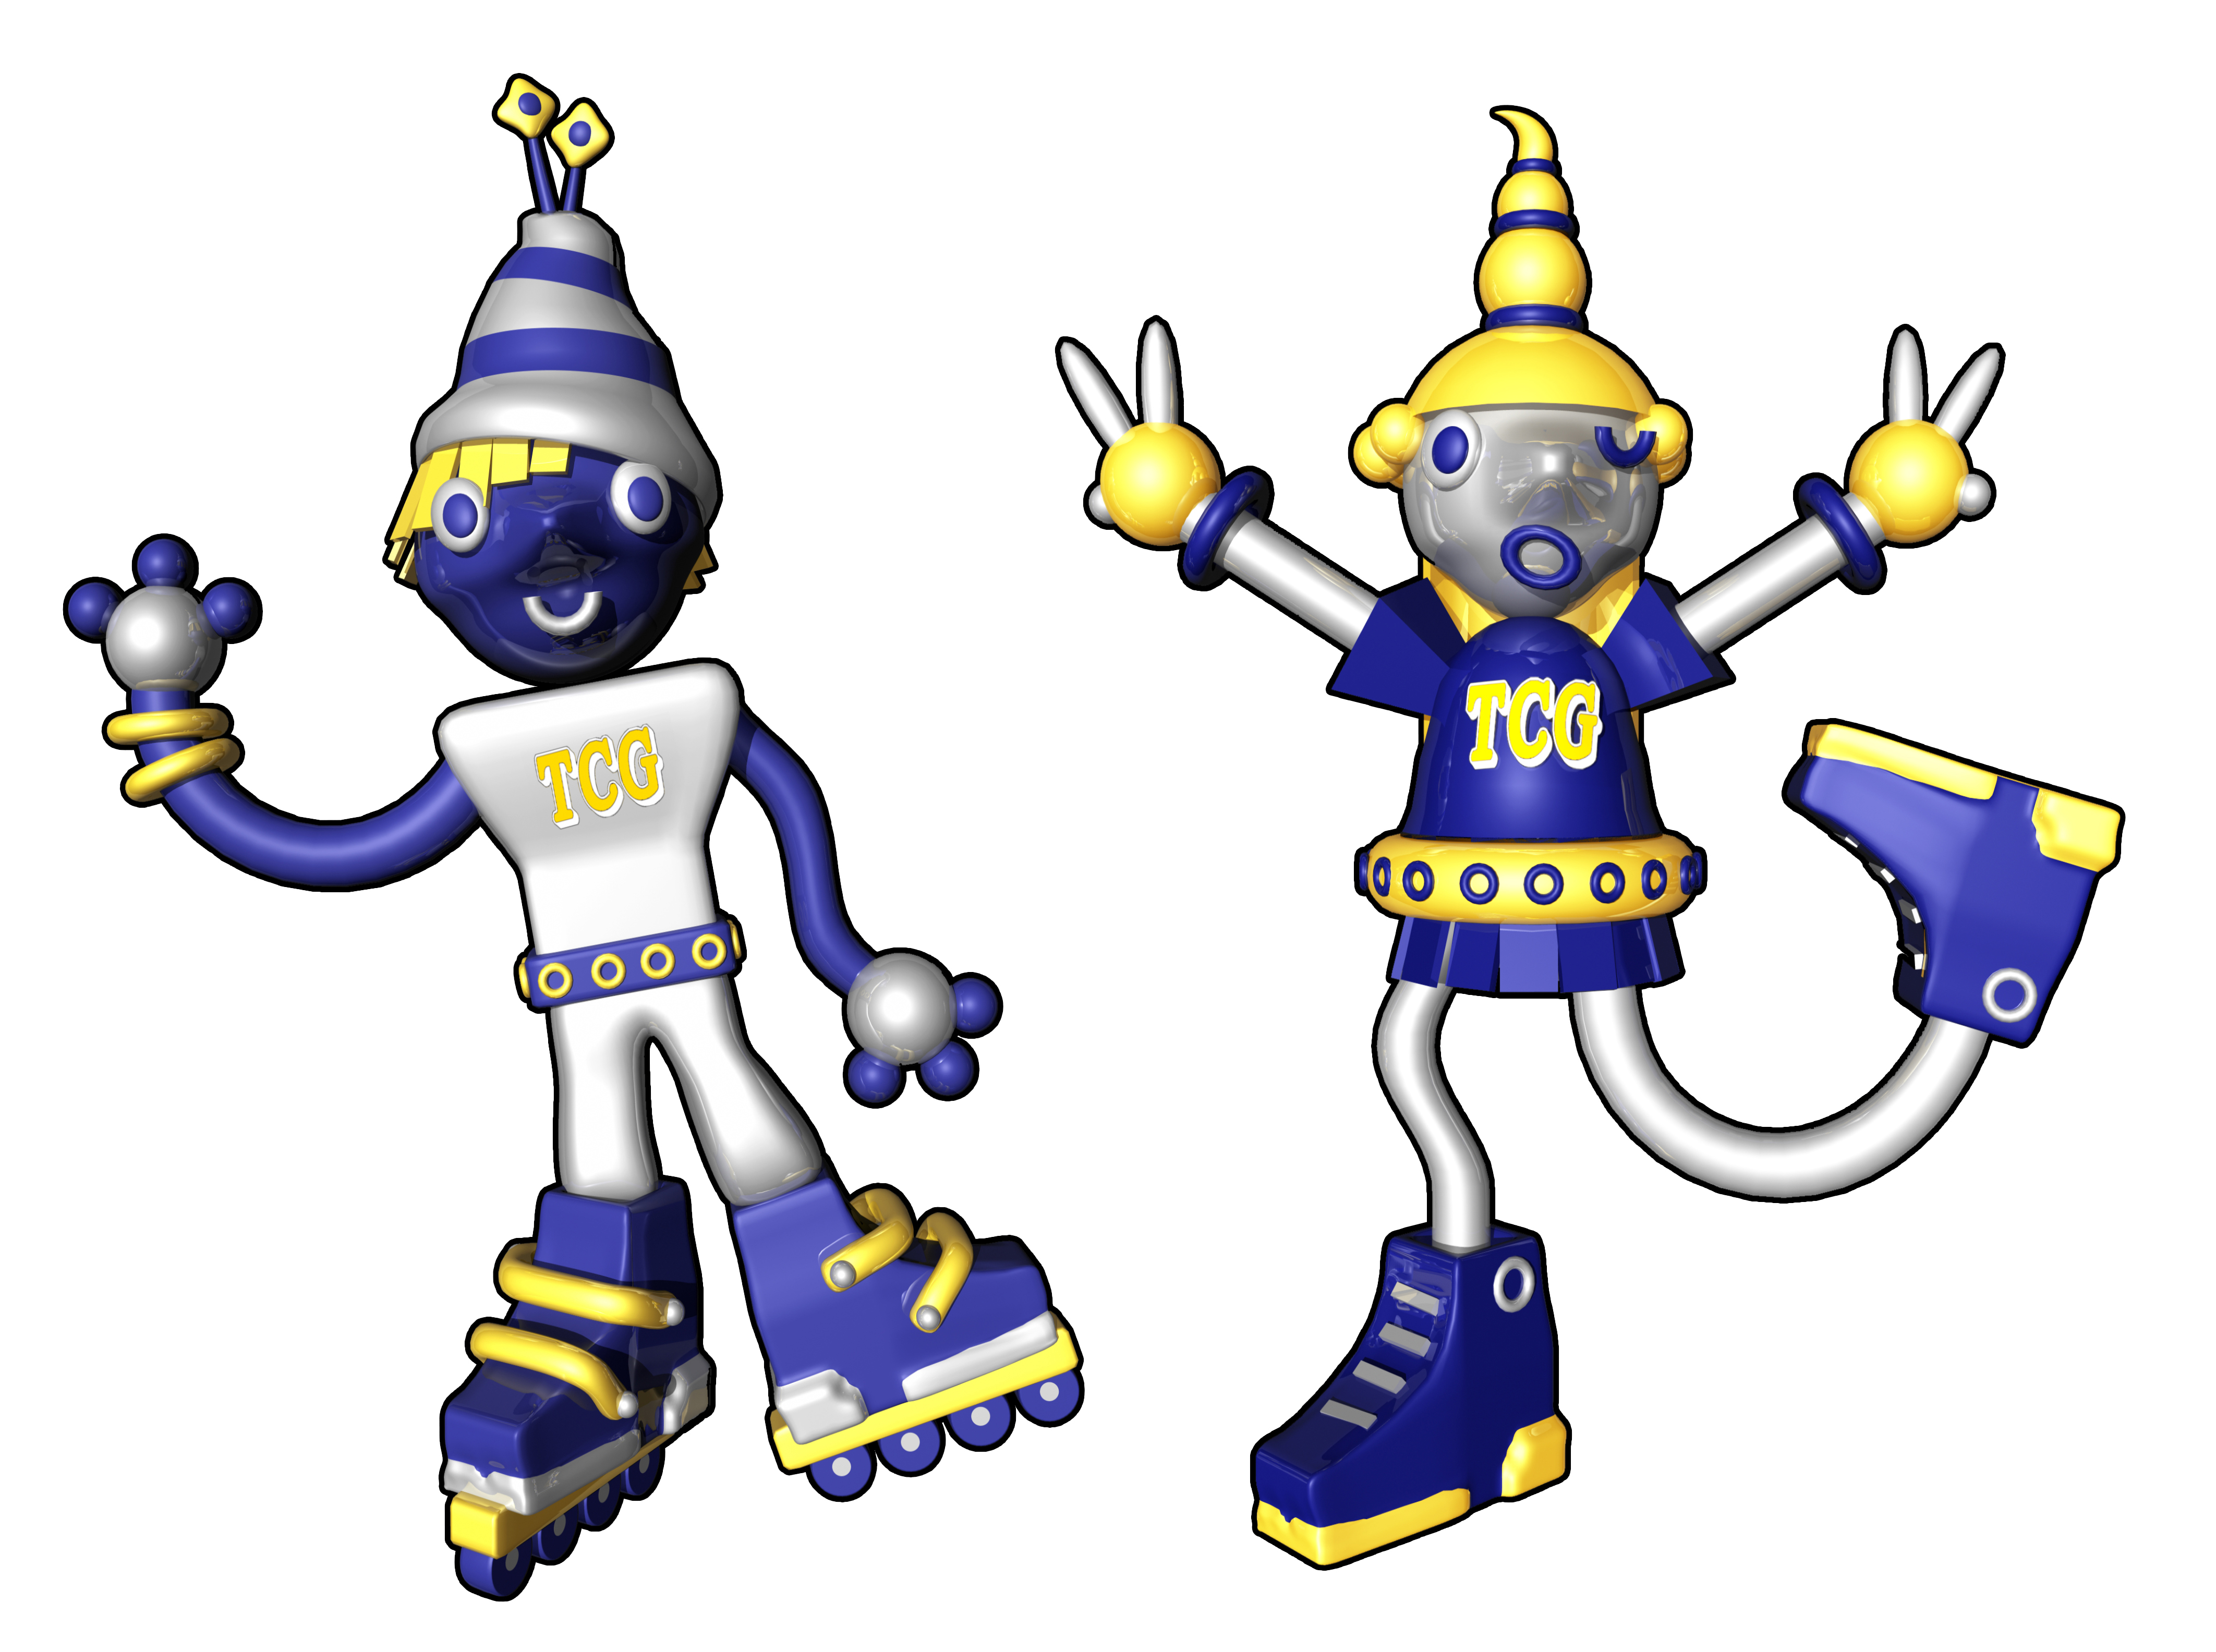 Stylized 3D characters on rollerblades smiling and posing